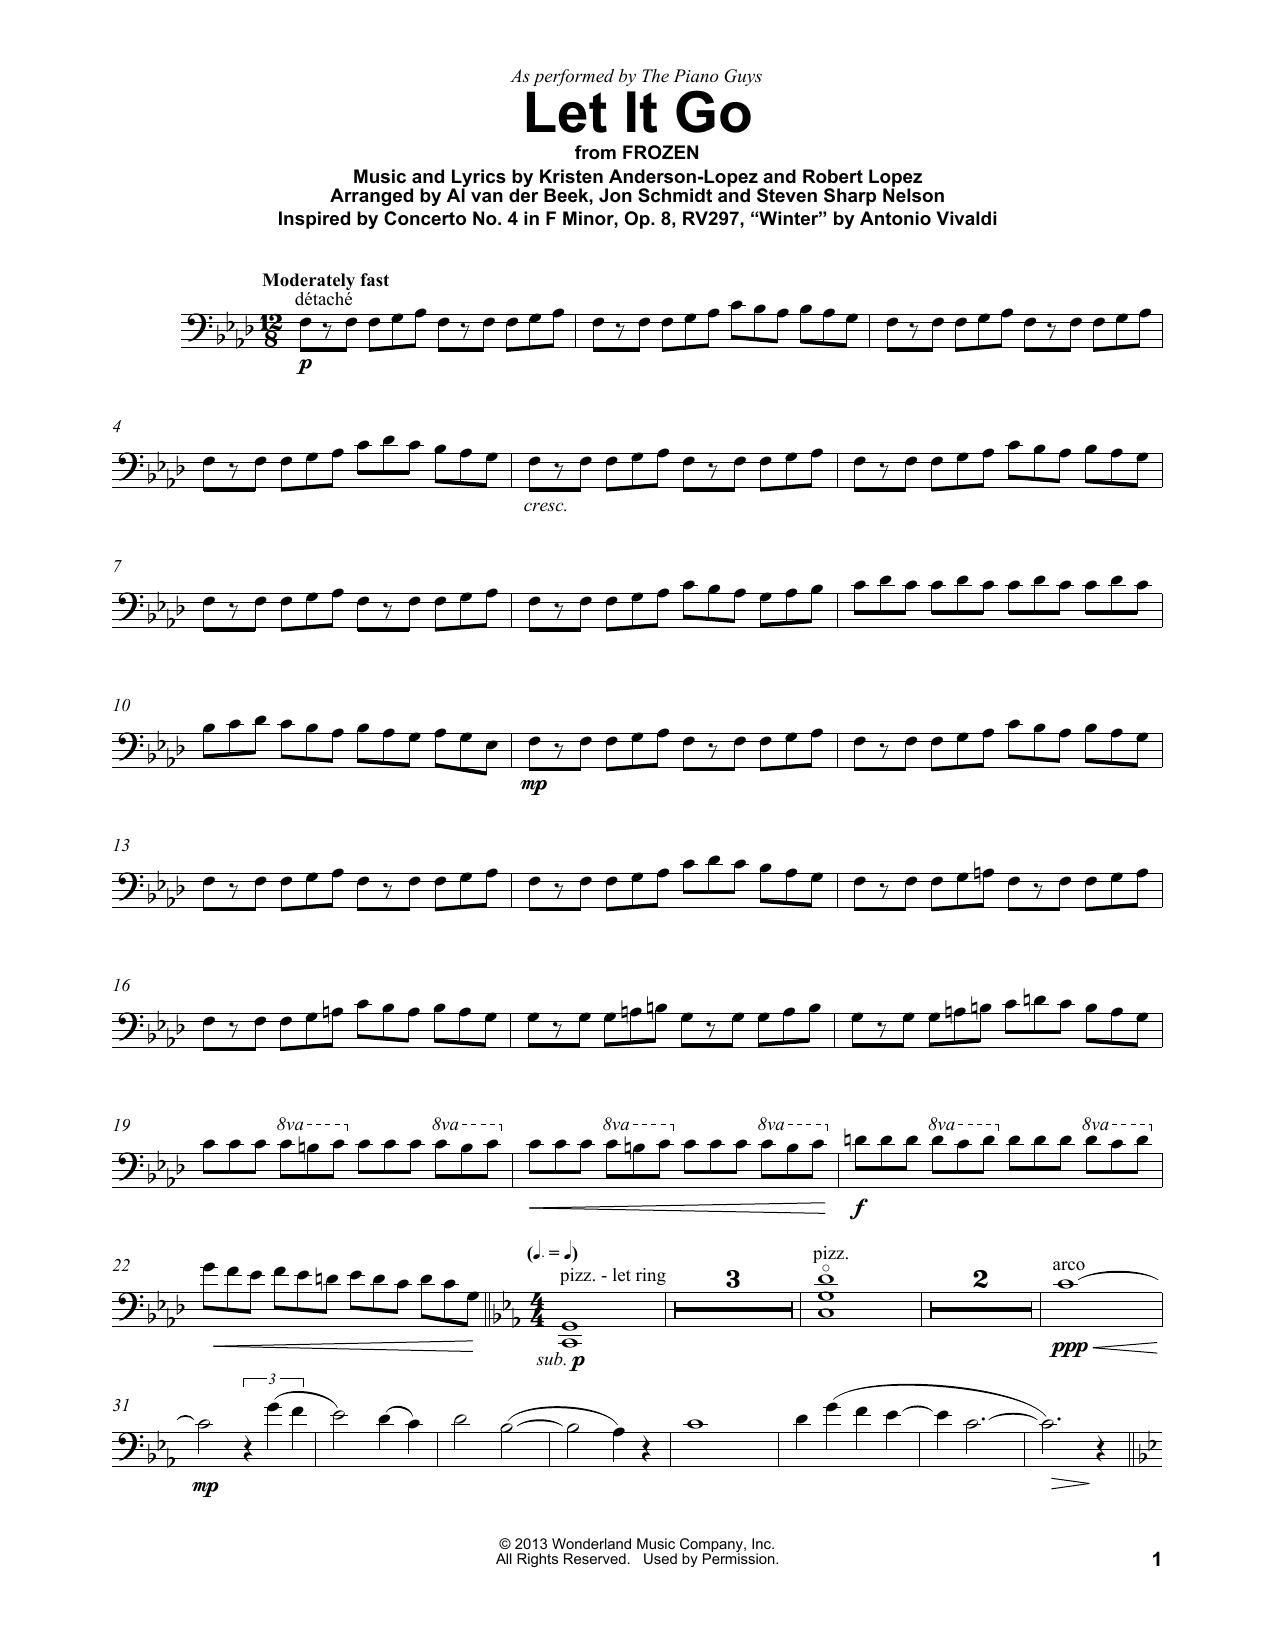 Download The Piano Guys Let It Go (from Frozen) Sheet Music